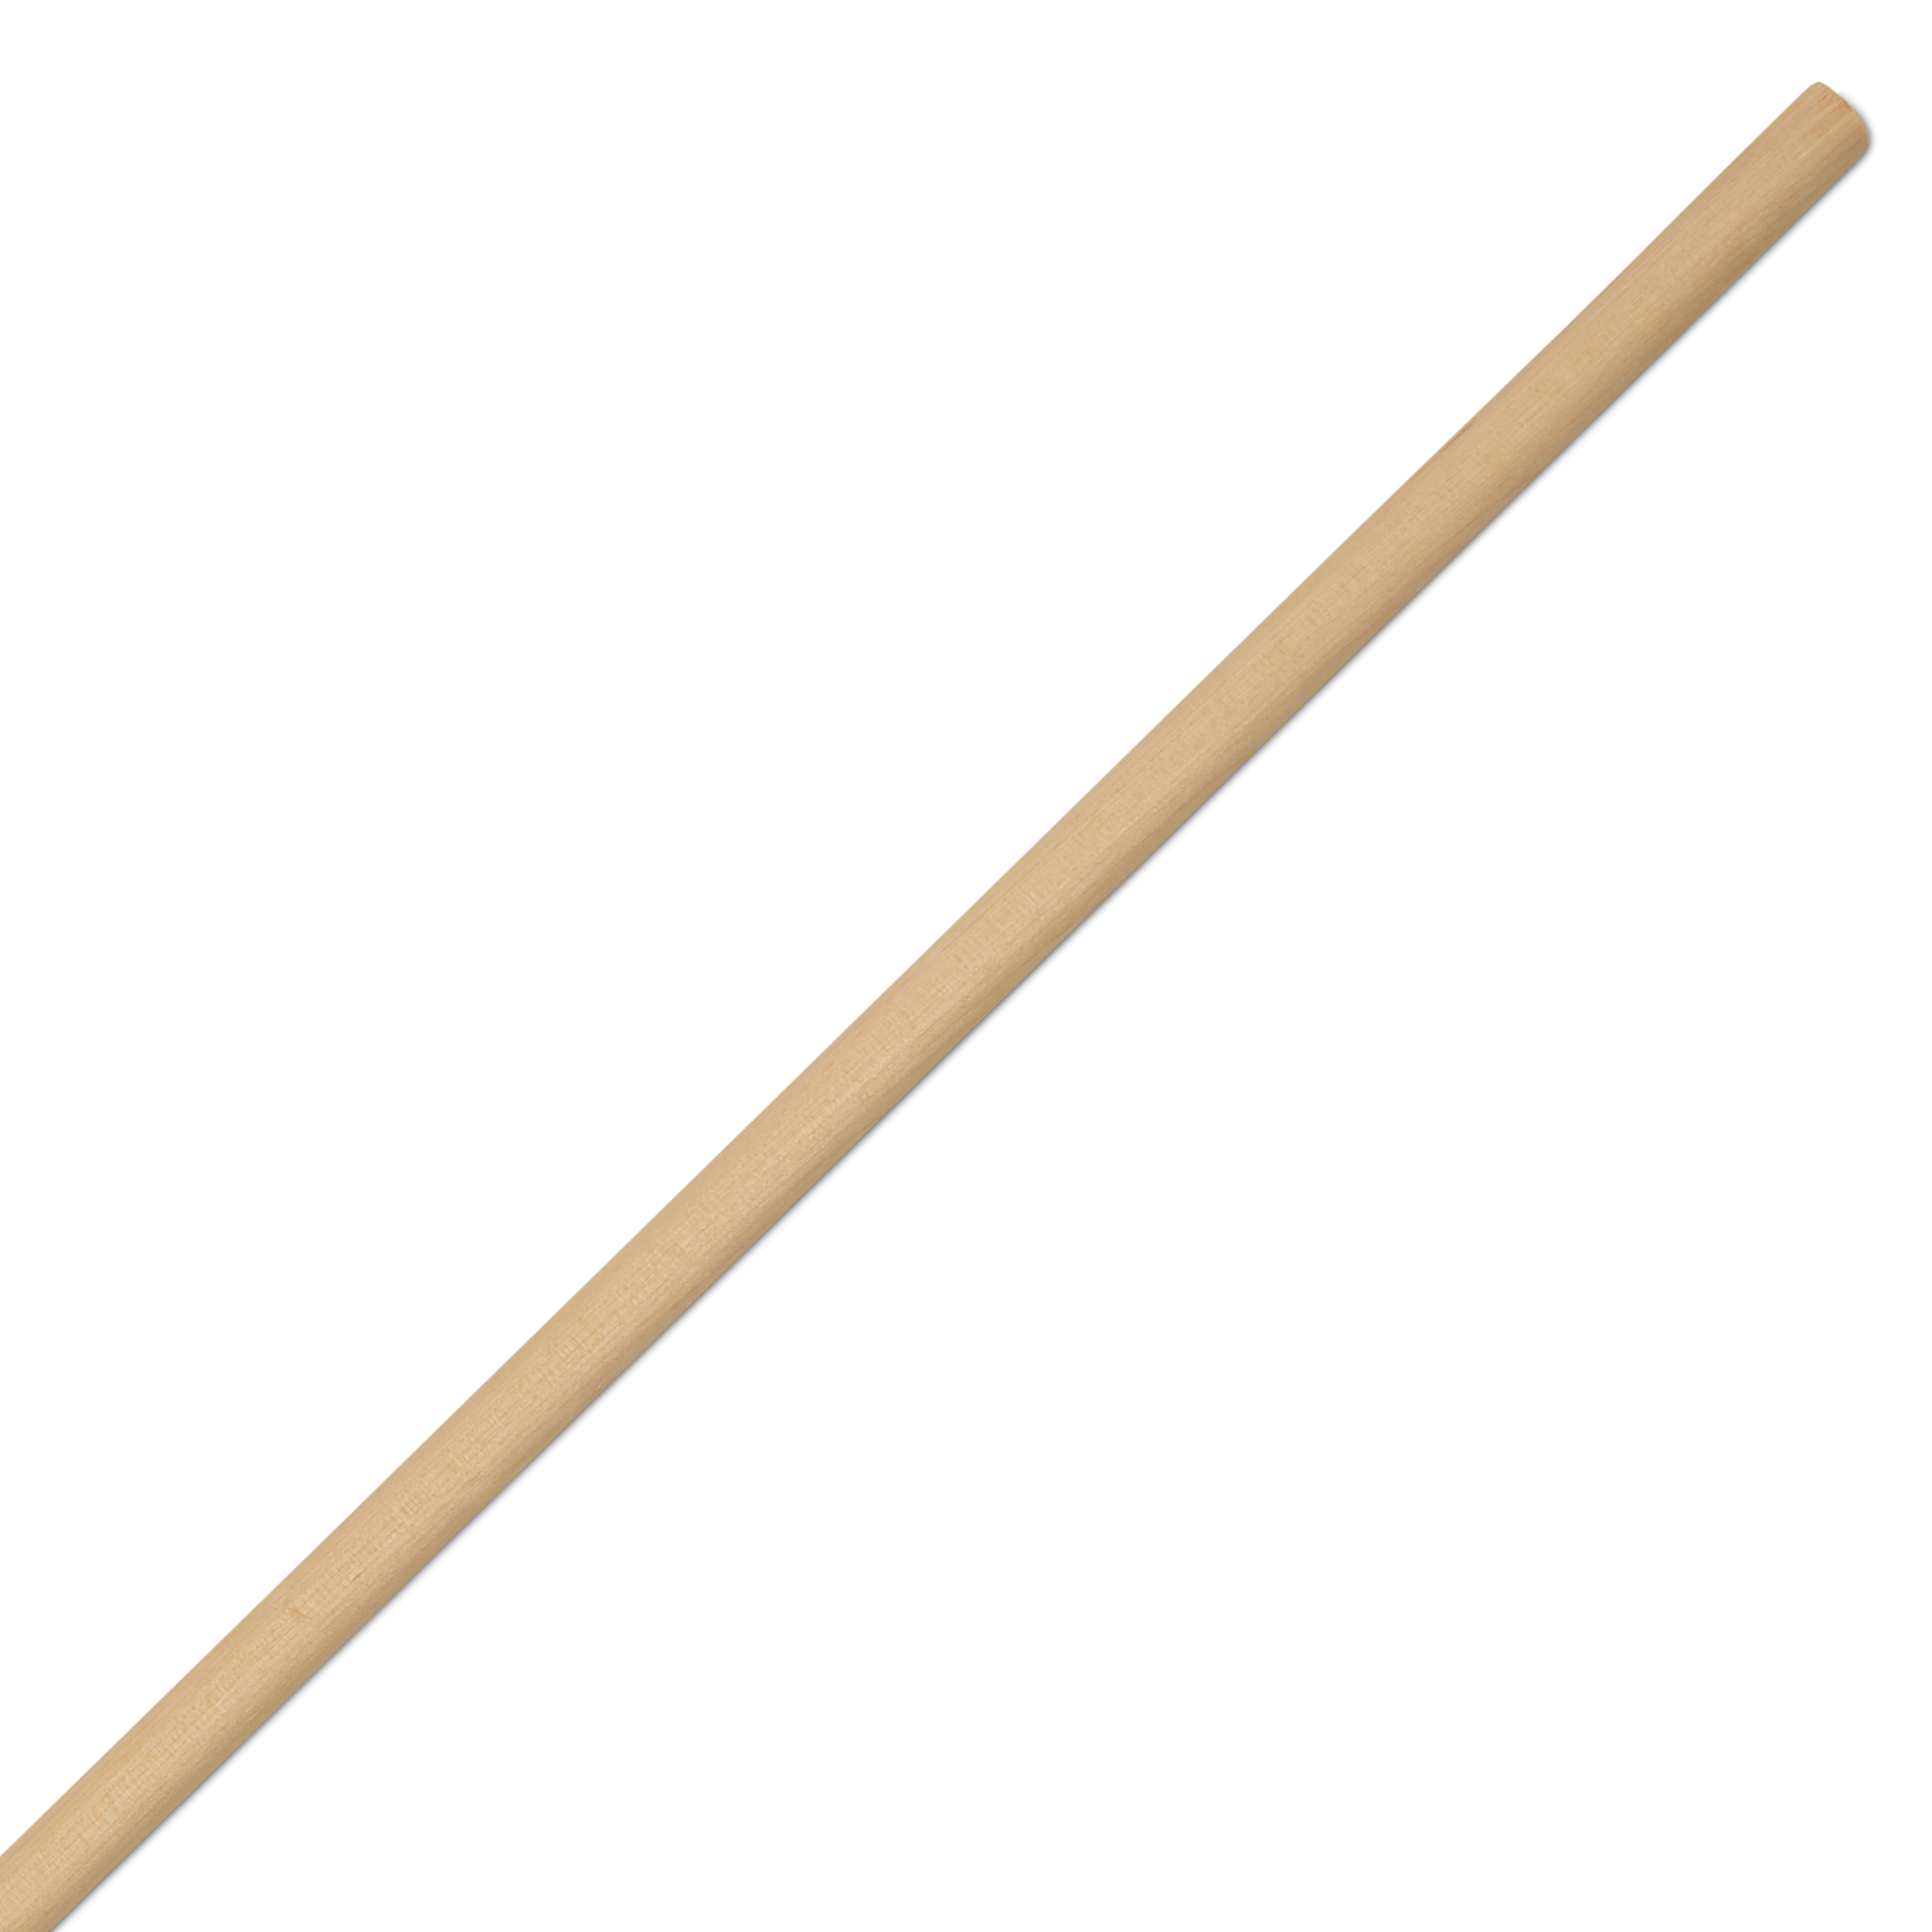 Dowel Rods Wood Sticks Wooden Dowel Rods 5/16 x 18 Inch Unfinished Hardwood Sticks for Crafts and DIY’ers 100 Pieces by Woodpeckers 